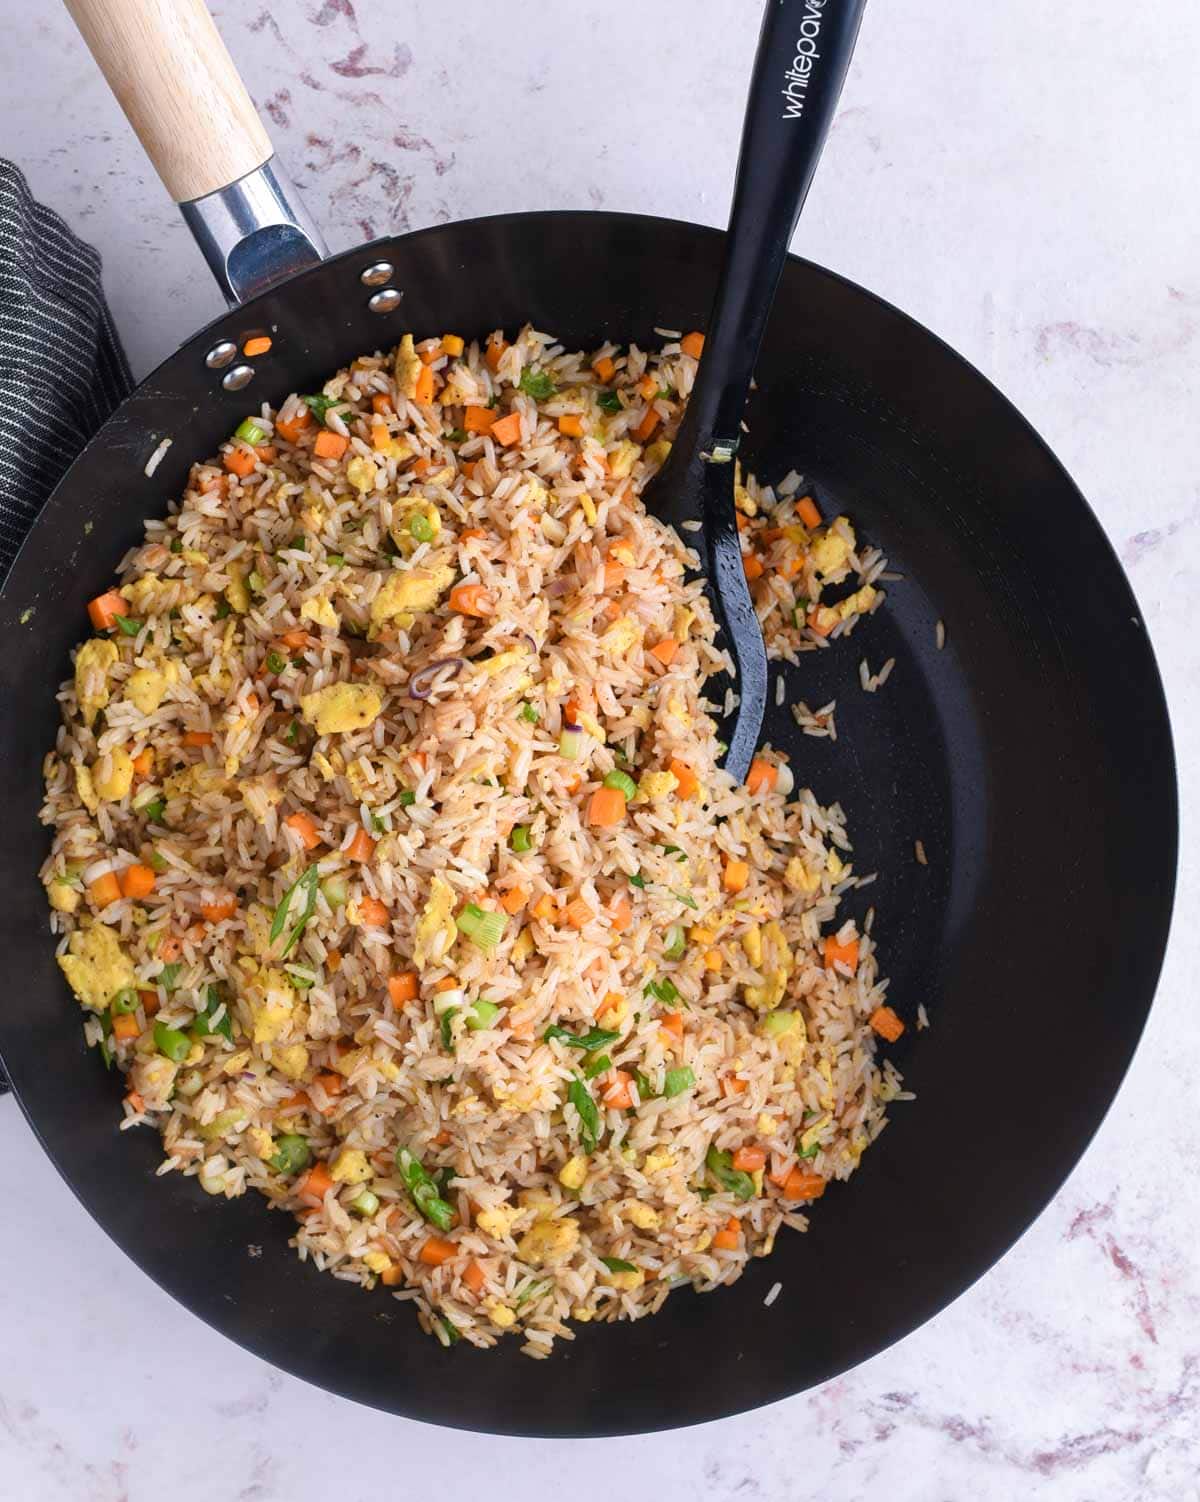 day old rice, veggies and sauce tossed in a wok to make the best egg fried rice ever 